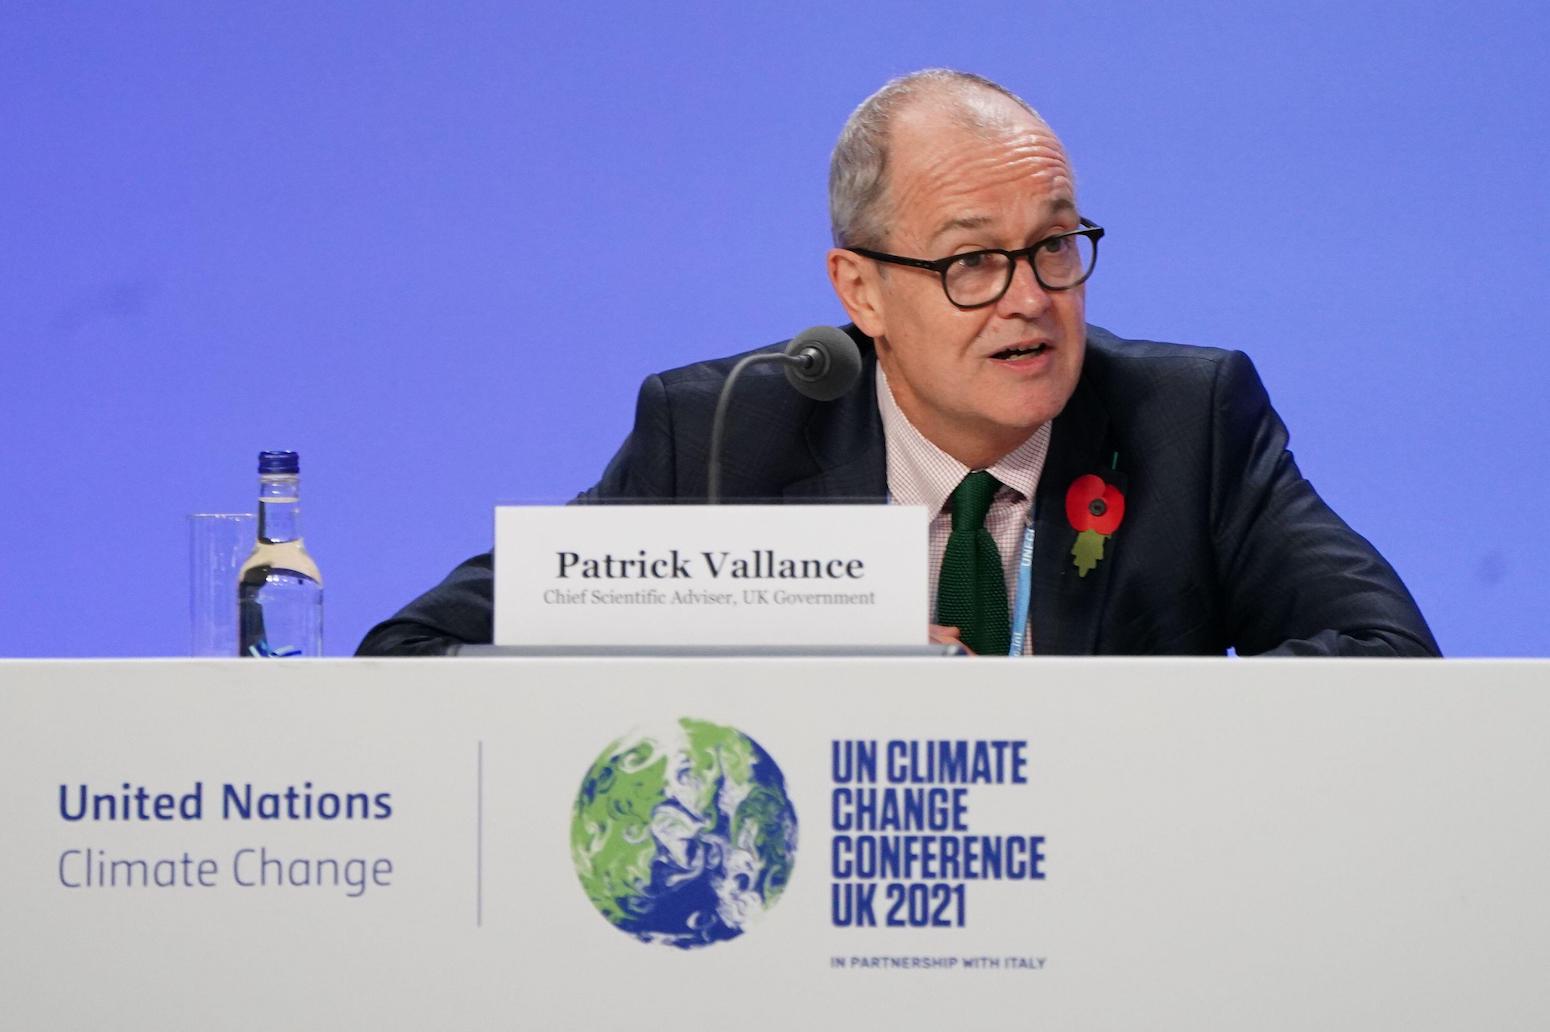 Chief scientific adviser Sir Patrick Vallance at panel discussion during the Science and Innovation Day of COP26 in Glasgow